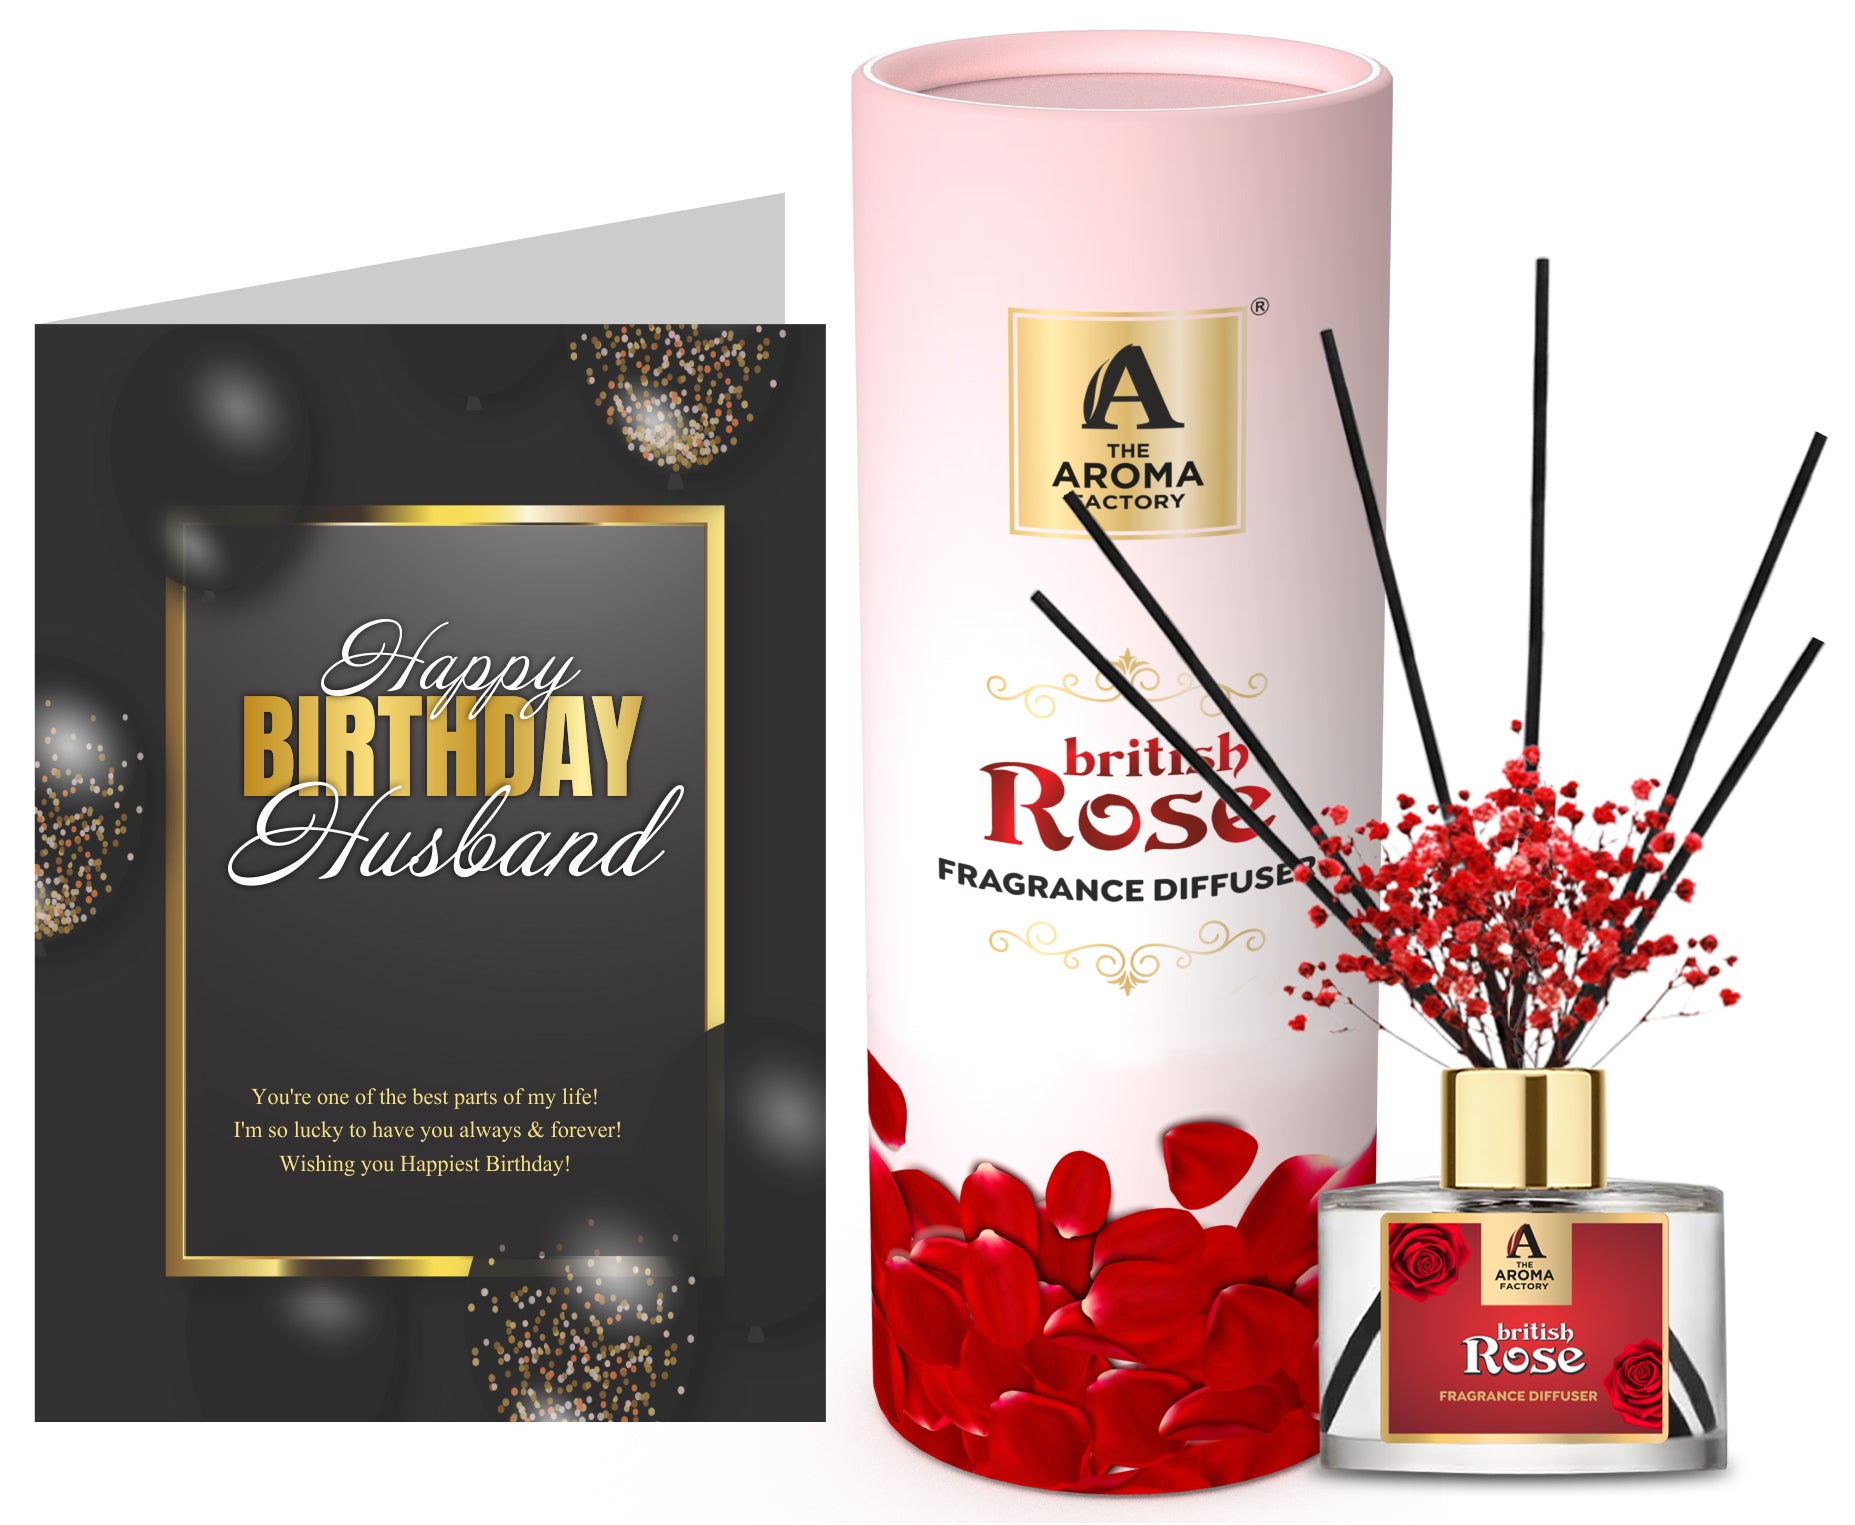 The Aroma Factory Happy Birthday Husband Gift with Card, British Rose Fragrance Reed Diffuser Set (1 Box + 1 Card)